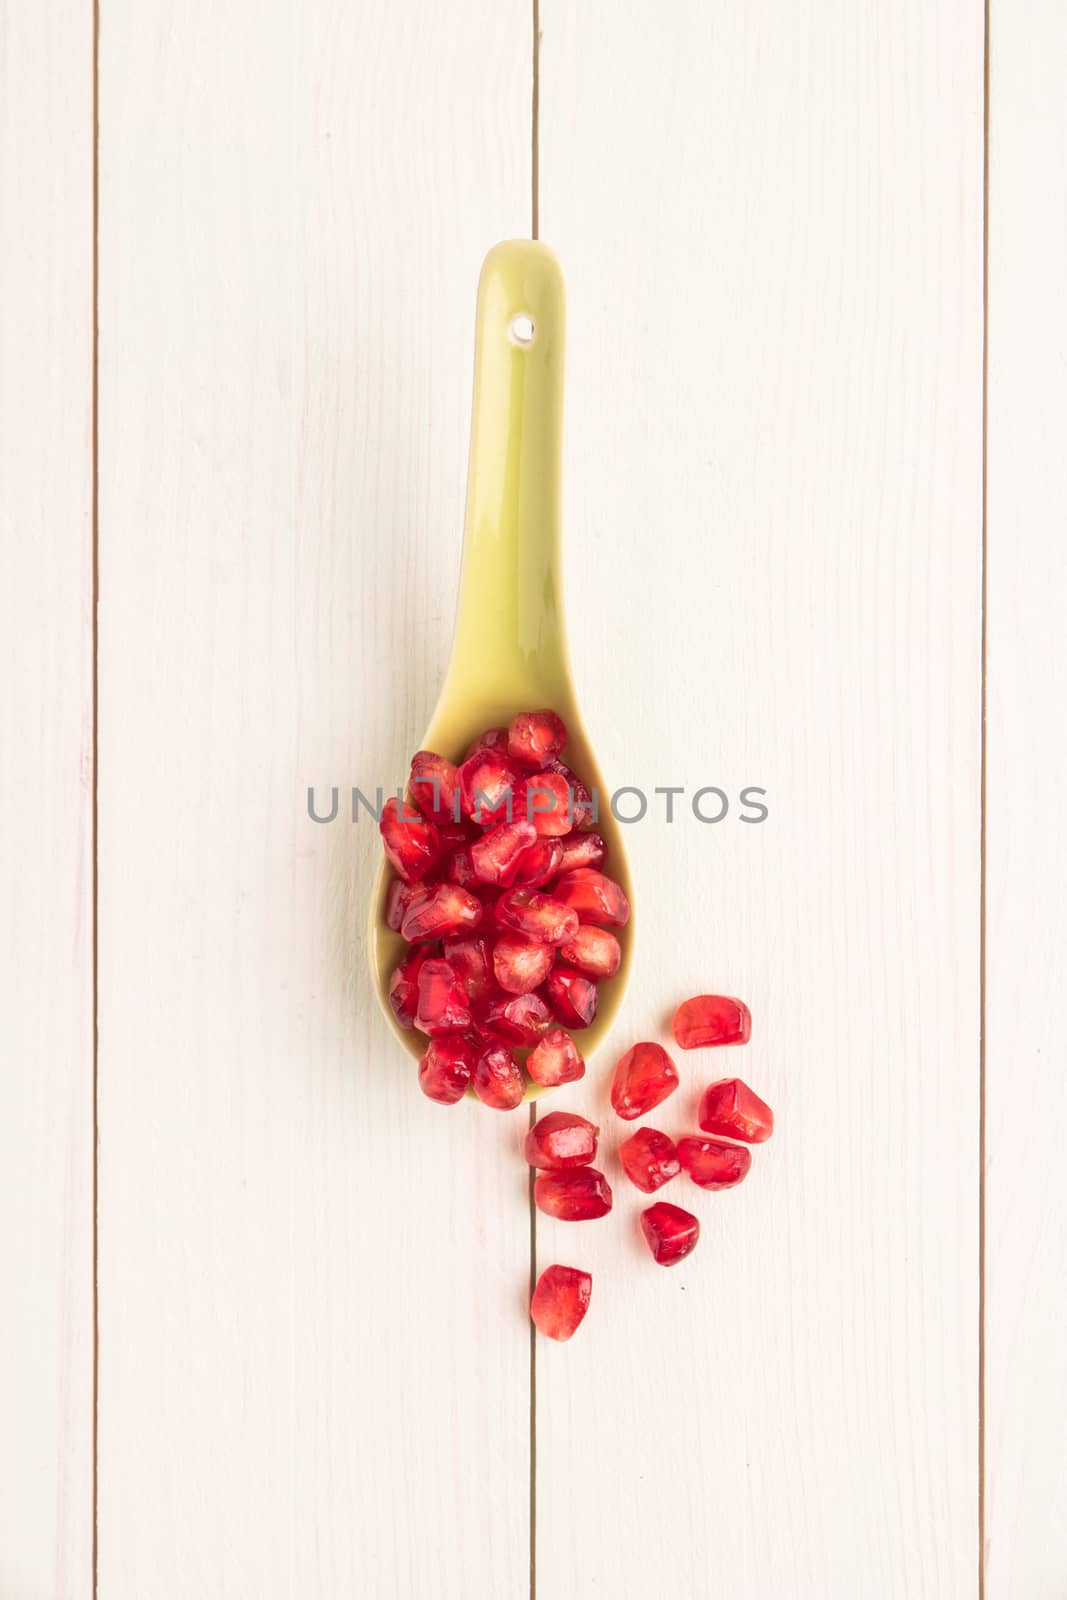 Seeds of red ripe peeled pomegranate on ceramic spoon. Rustic wood board background. Top view, copy space